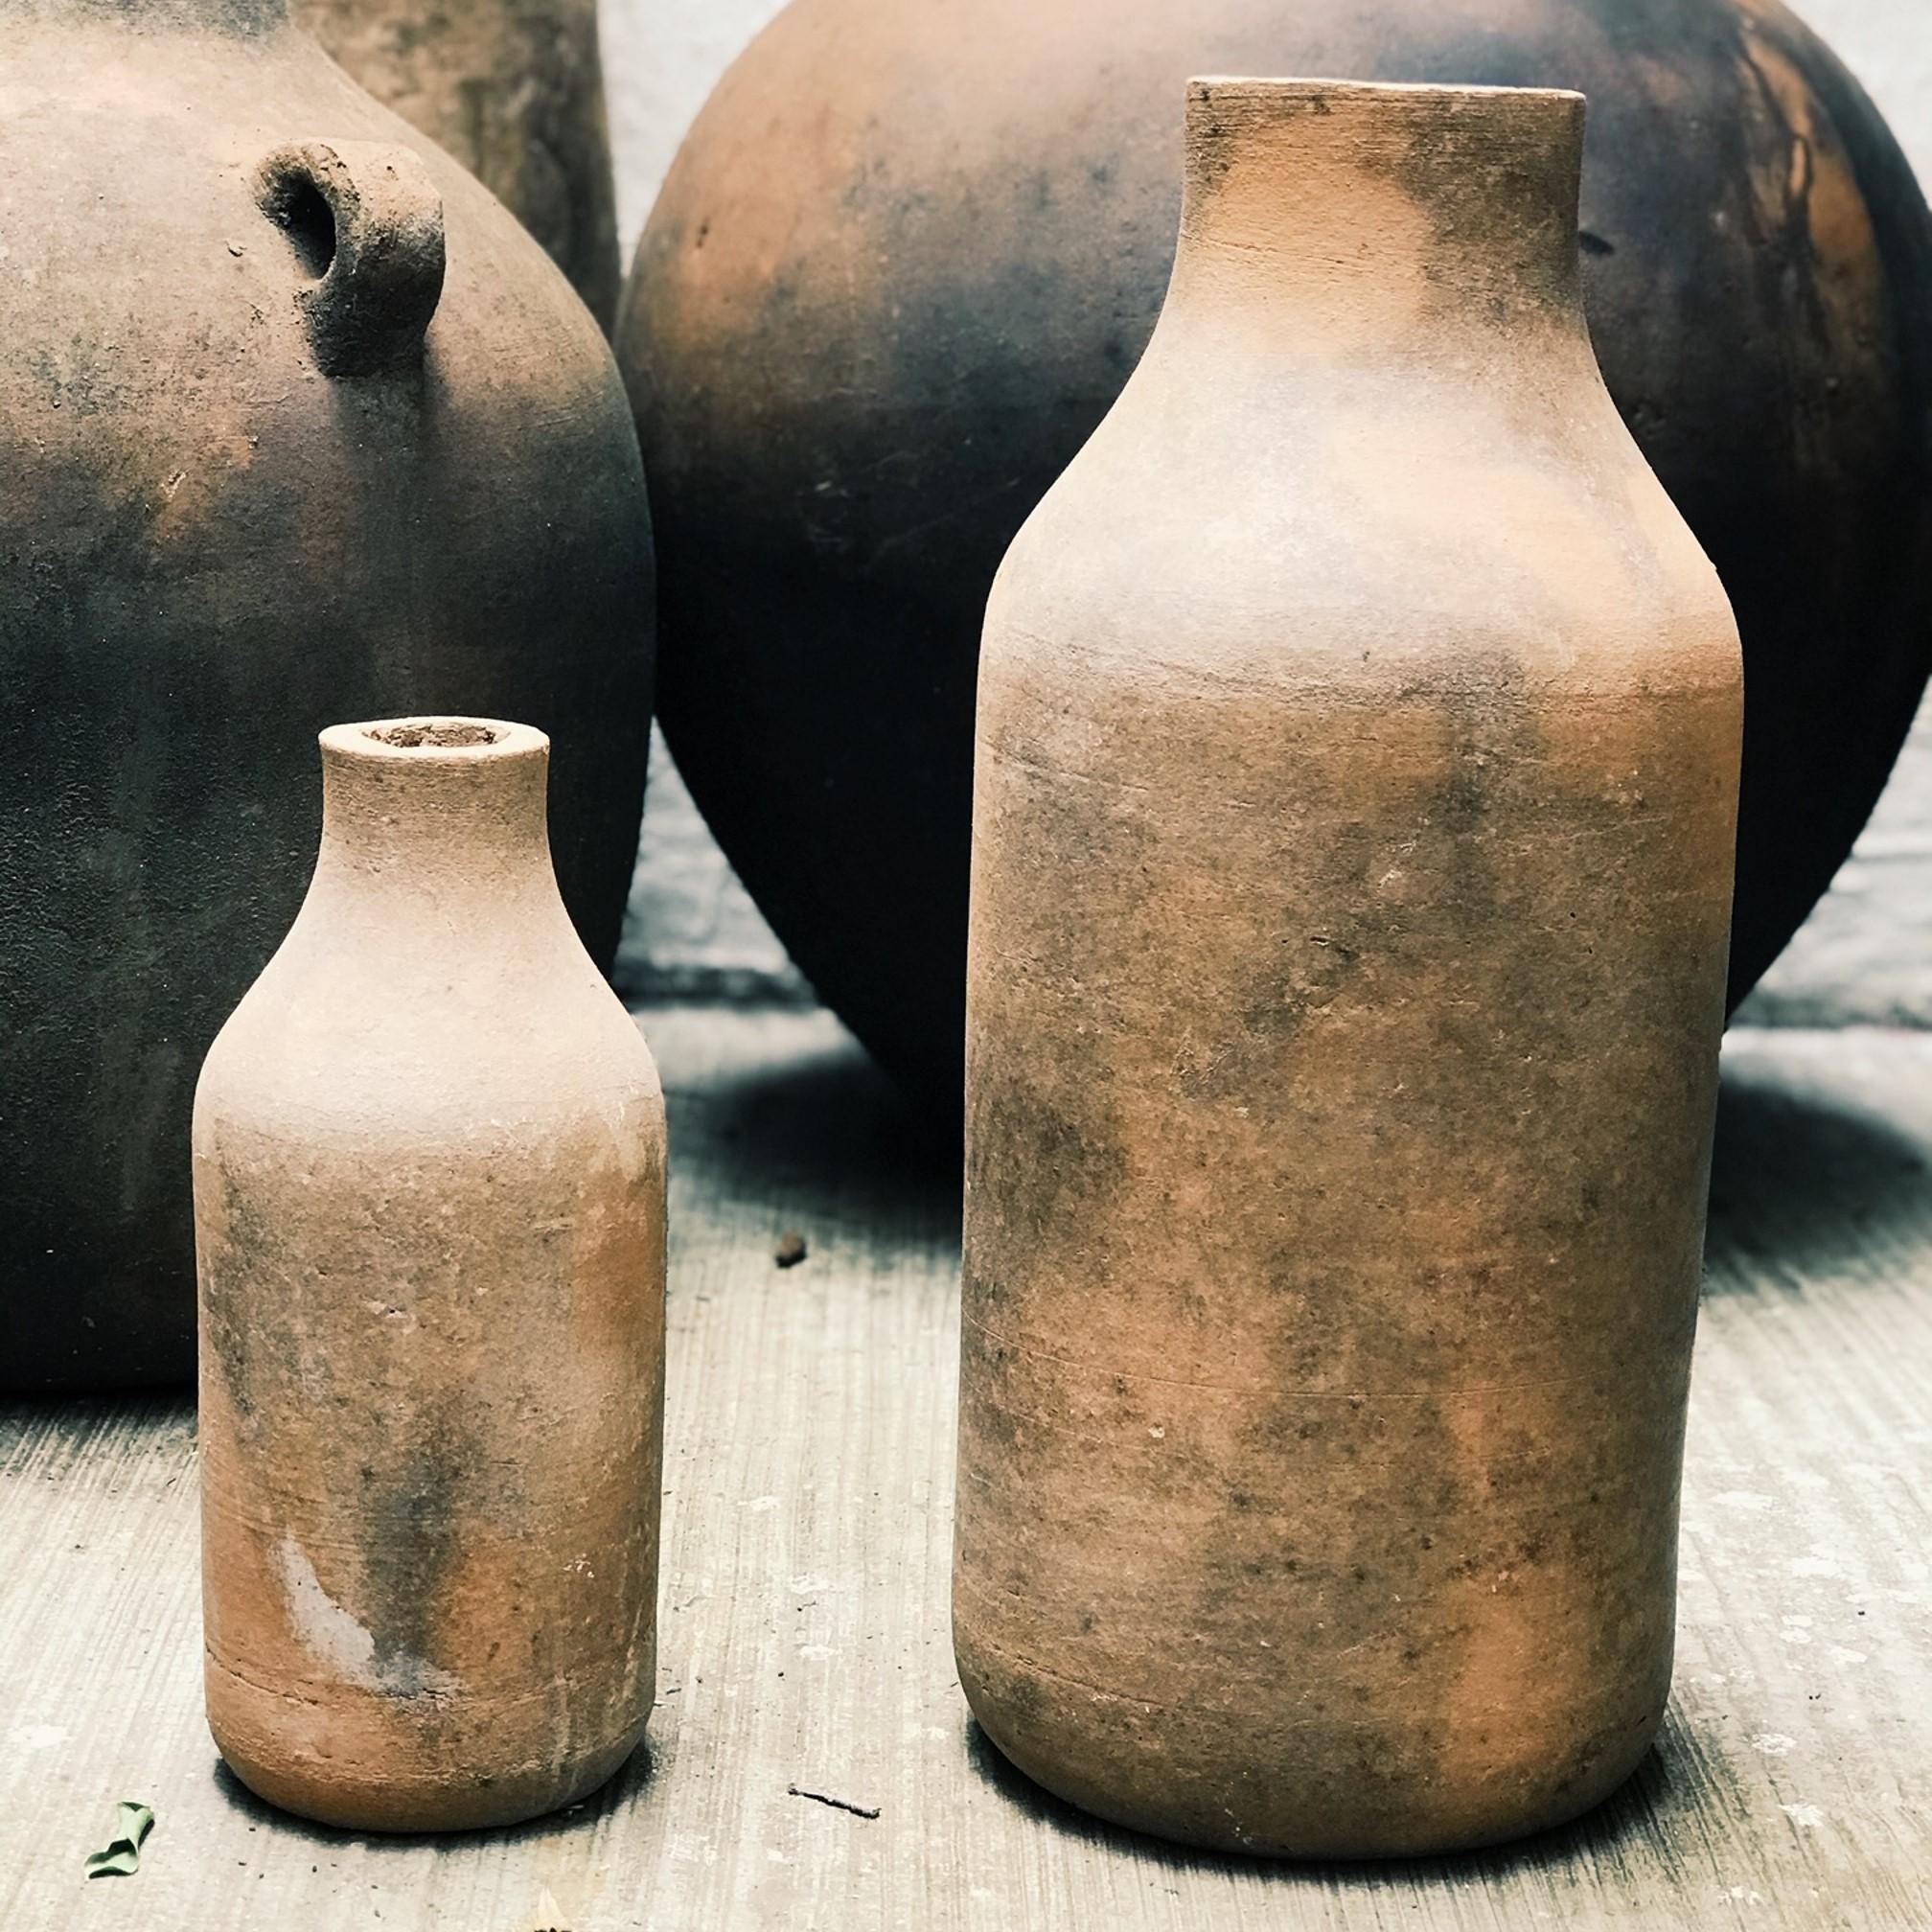 Los Pedritos are a set of vintage terracotta vessels discovered in a potters studio in region of Jalisco, Mexico. The part consist of one large and one small terracotta vessels that can make for great decorative interior accessories. 

Los